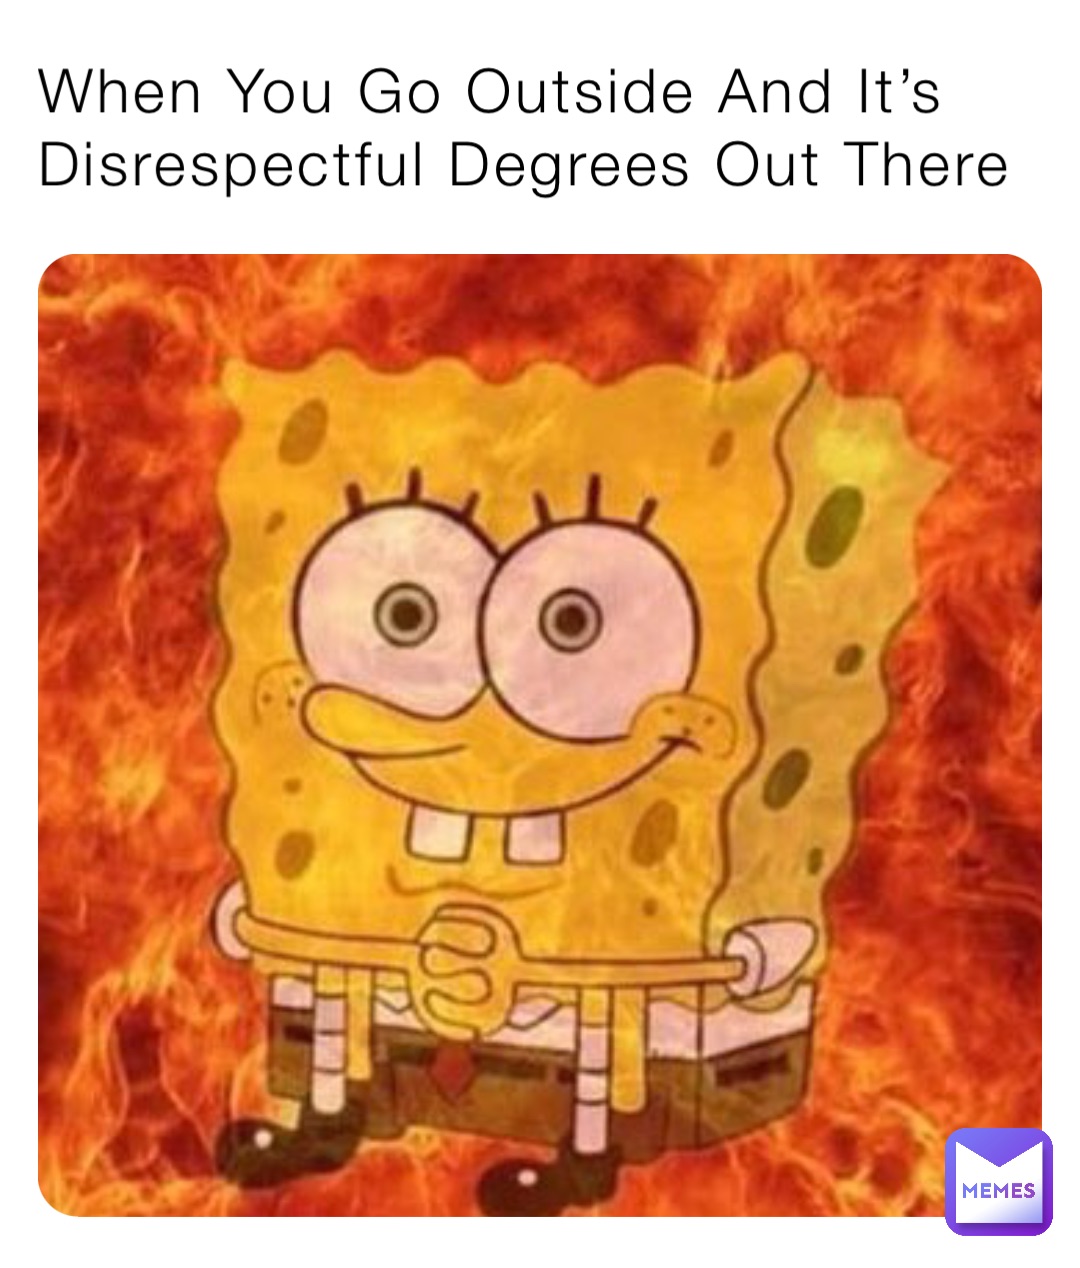 When You Go Outside And It’s Disrespectful Degrees Out There